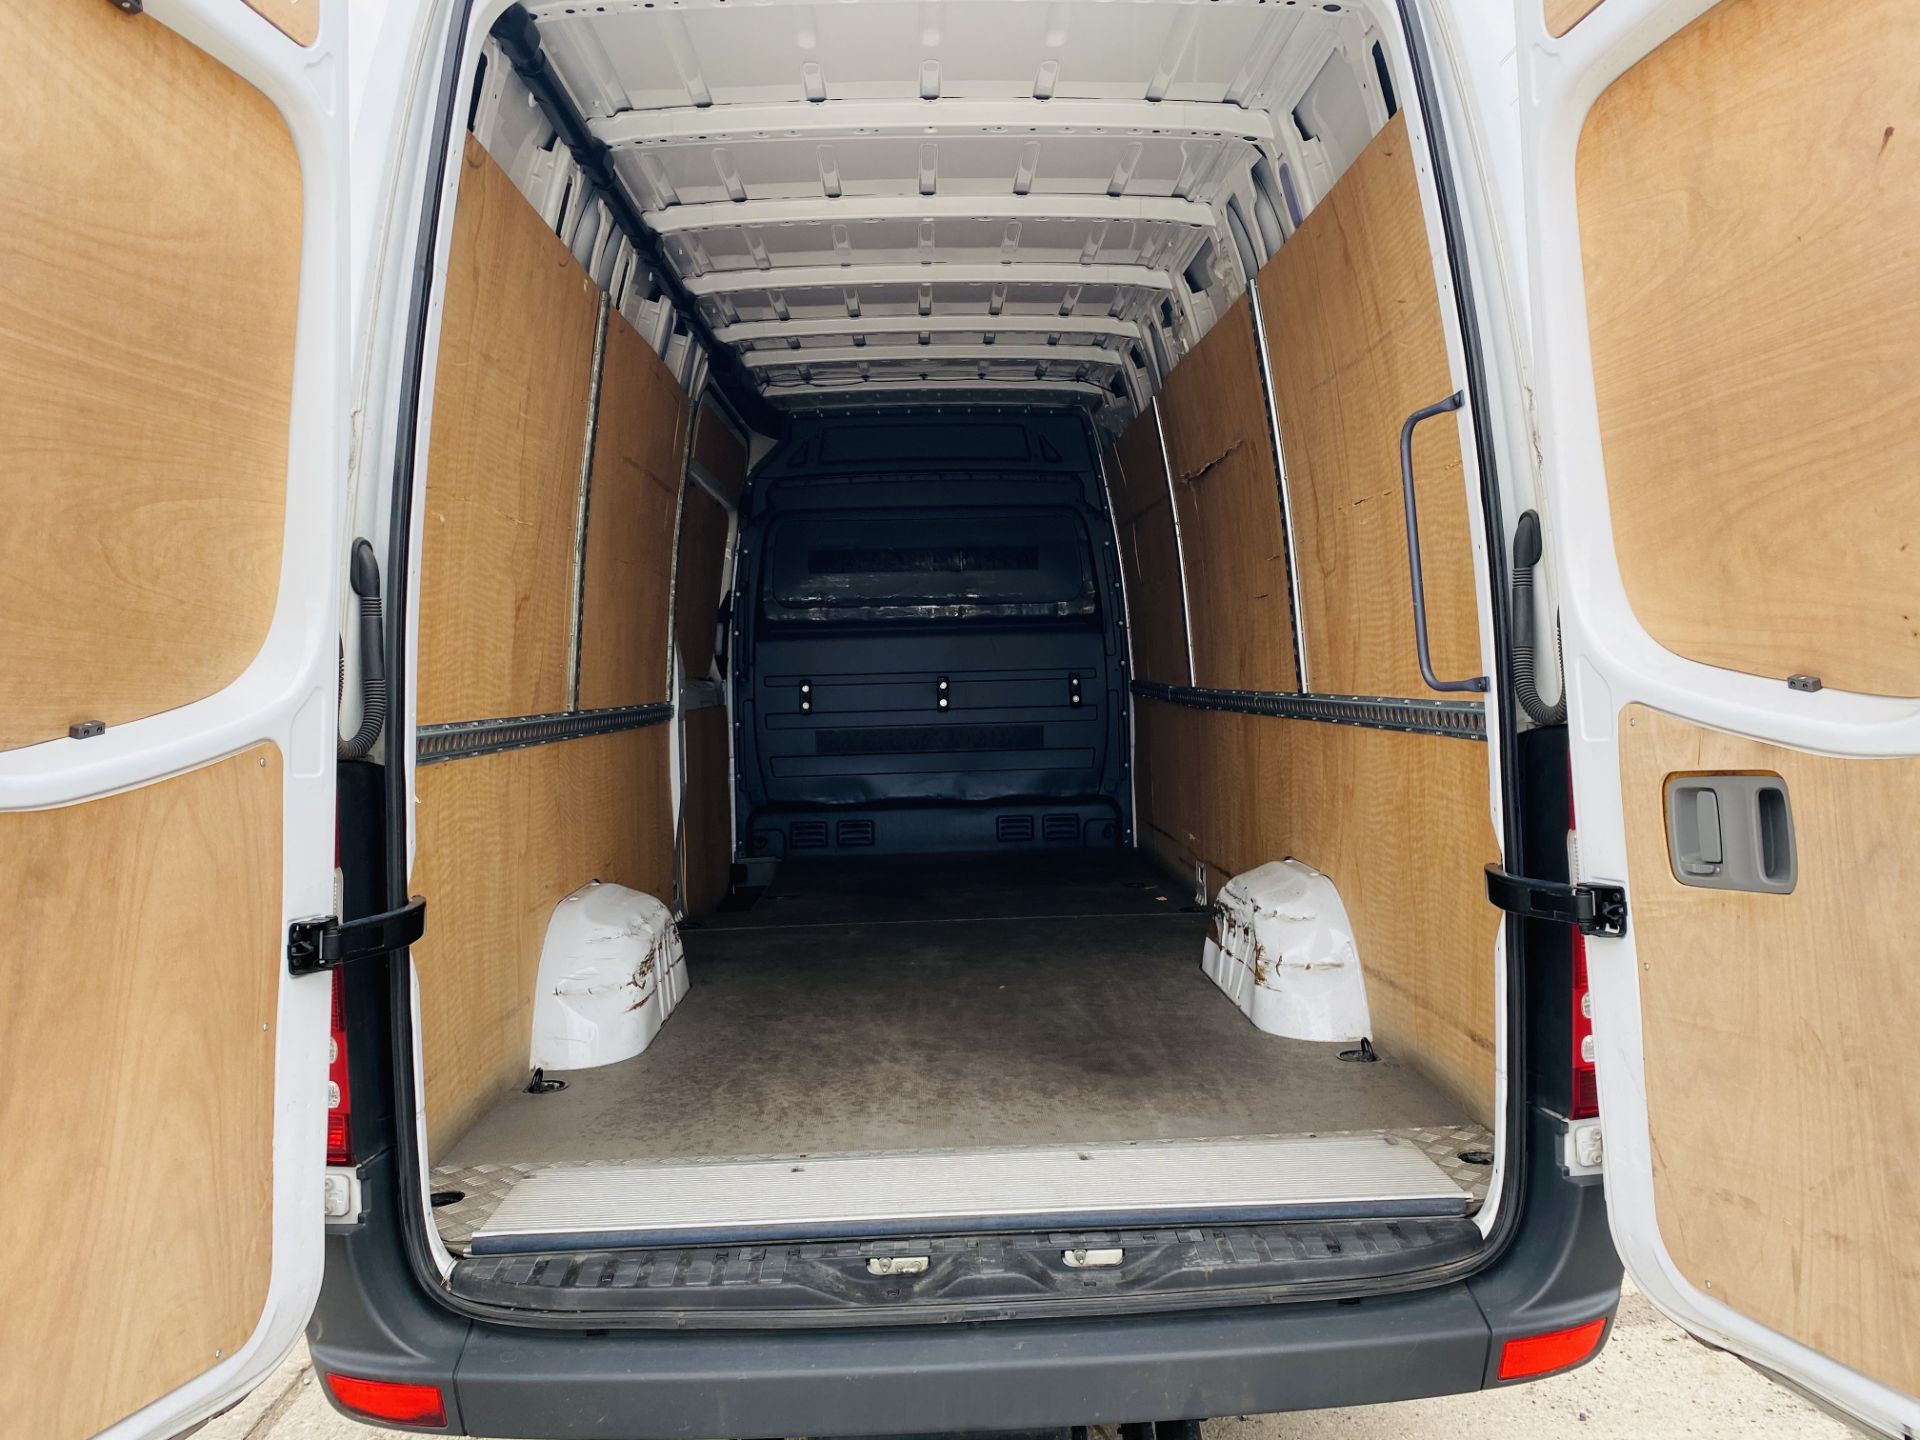 MERCEDES SPRINTER 314CDI "LWB" HIGH ROOF WITH FULL ELECTRIC TAIL-LIFT - 2018 MODEL - 1 OWNER - FSH - Image 18 of 18